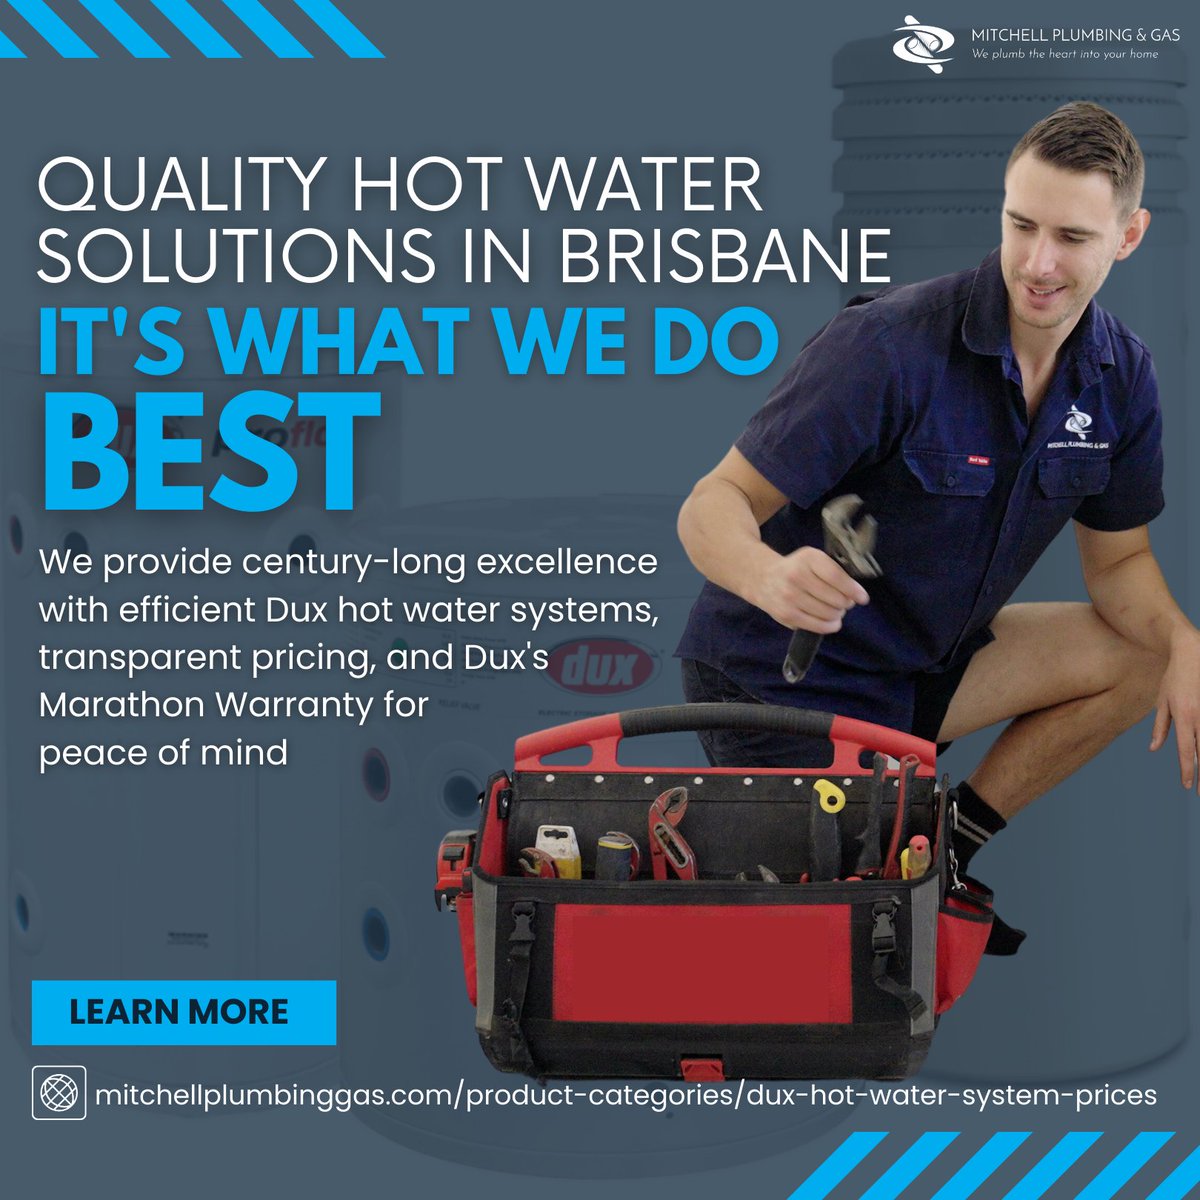 🌡️ Quality Hot Water Solutions in Brisbane - We bring a century of excellence with Dux hot water systems. Upgrade your hot water experience with us today! 🚿💪 #HotWaterSolutions #BrisbanePlumbing